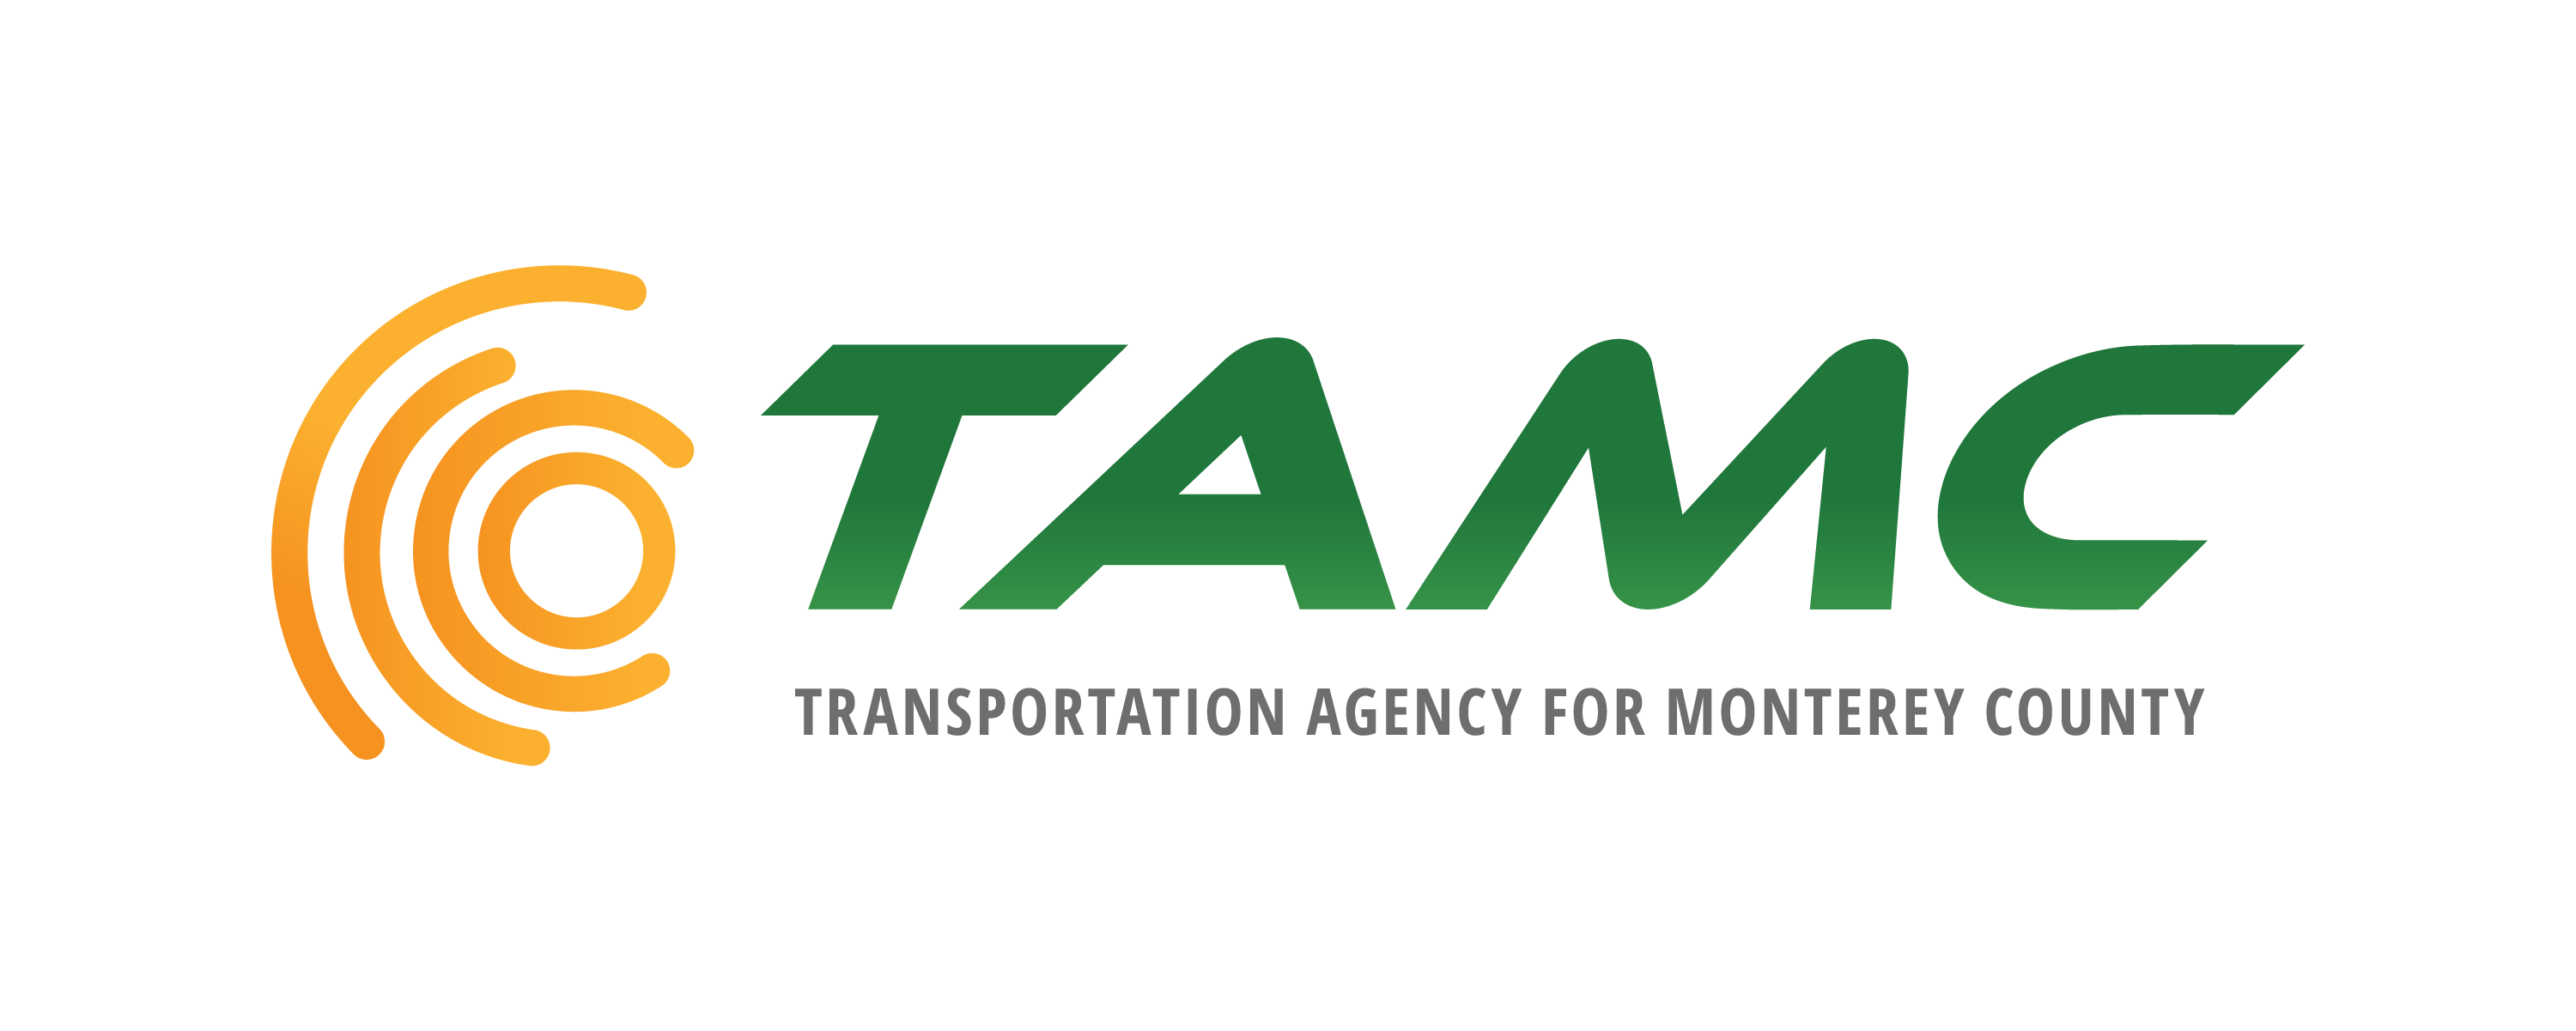 Transportation Agency for Monterey County